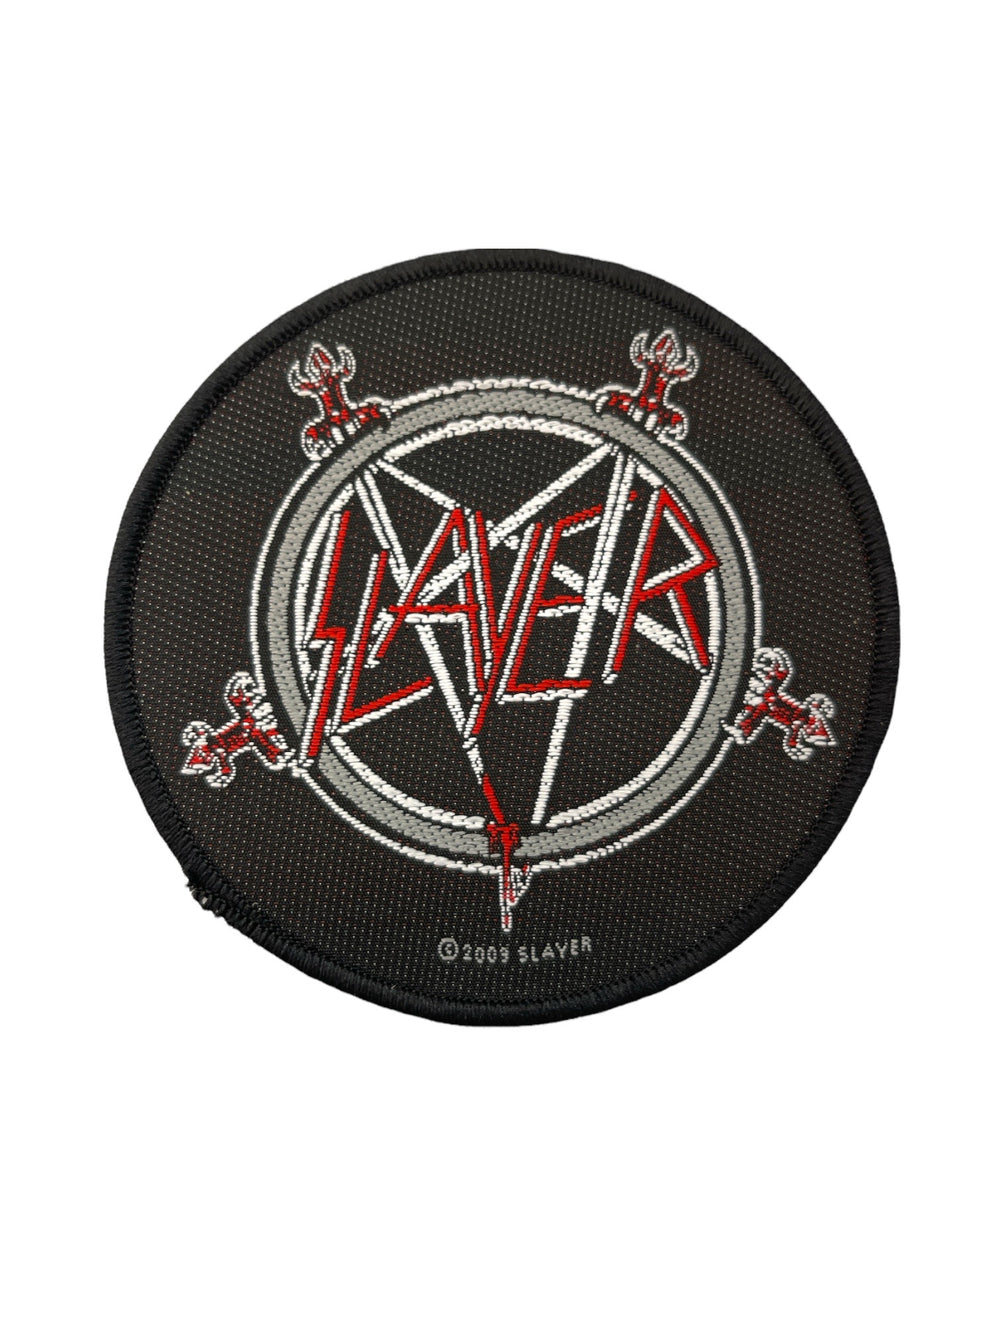 Slayer Pentangle Official Woven Patch Brand New Official